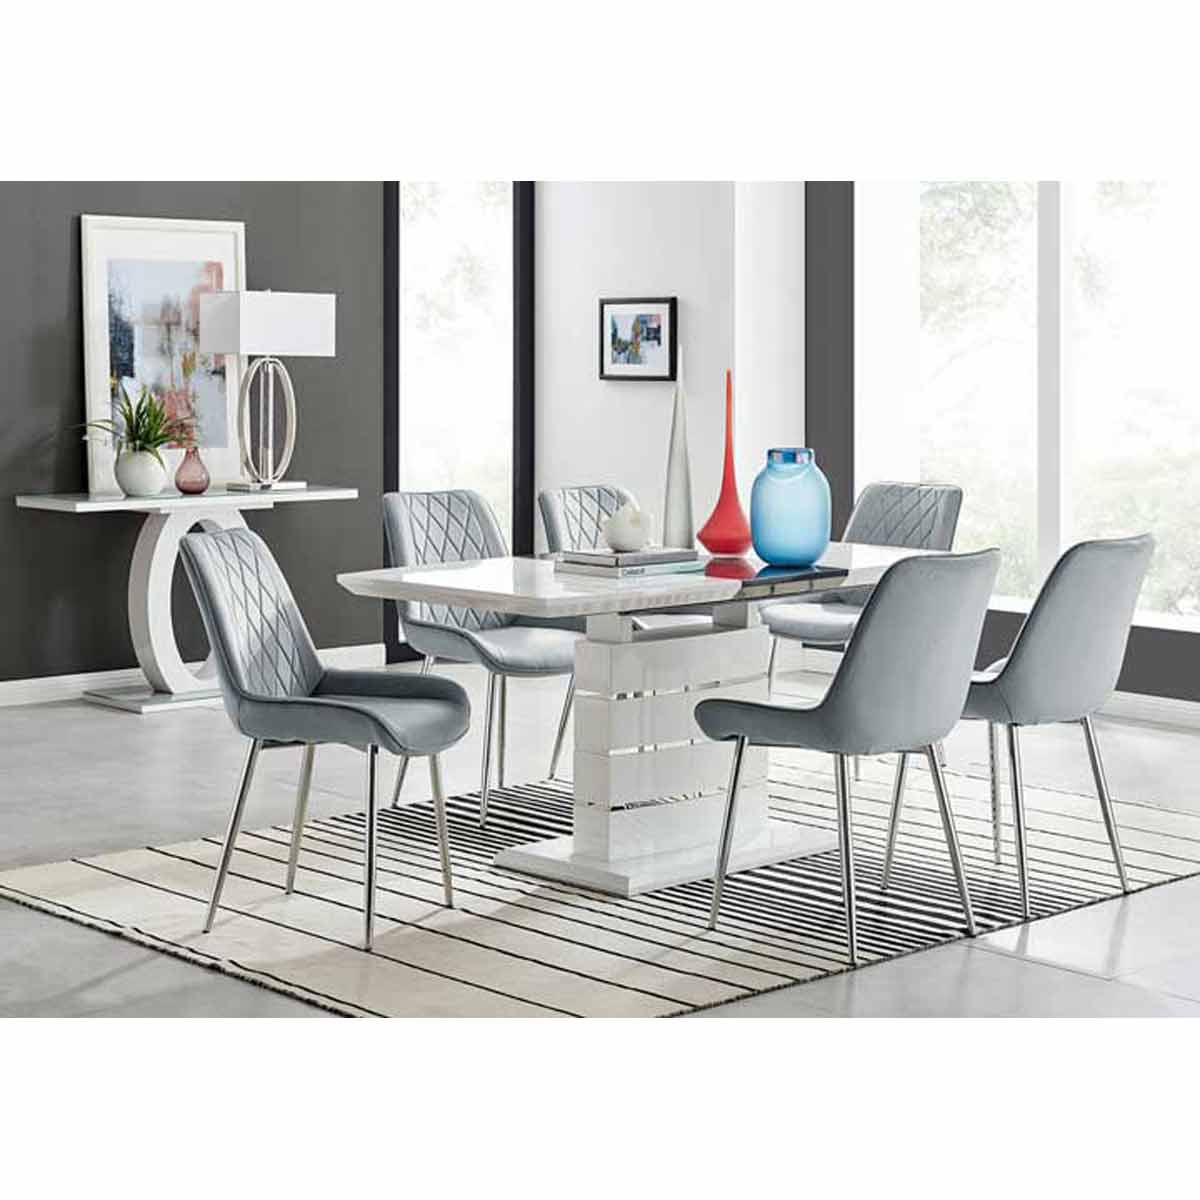 Furniture Box Renato 120cm High Gloss Extending Dining Table and 6 x Grey Pesaro Silver Leg Chairs